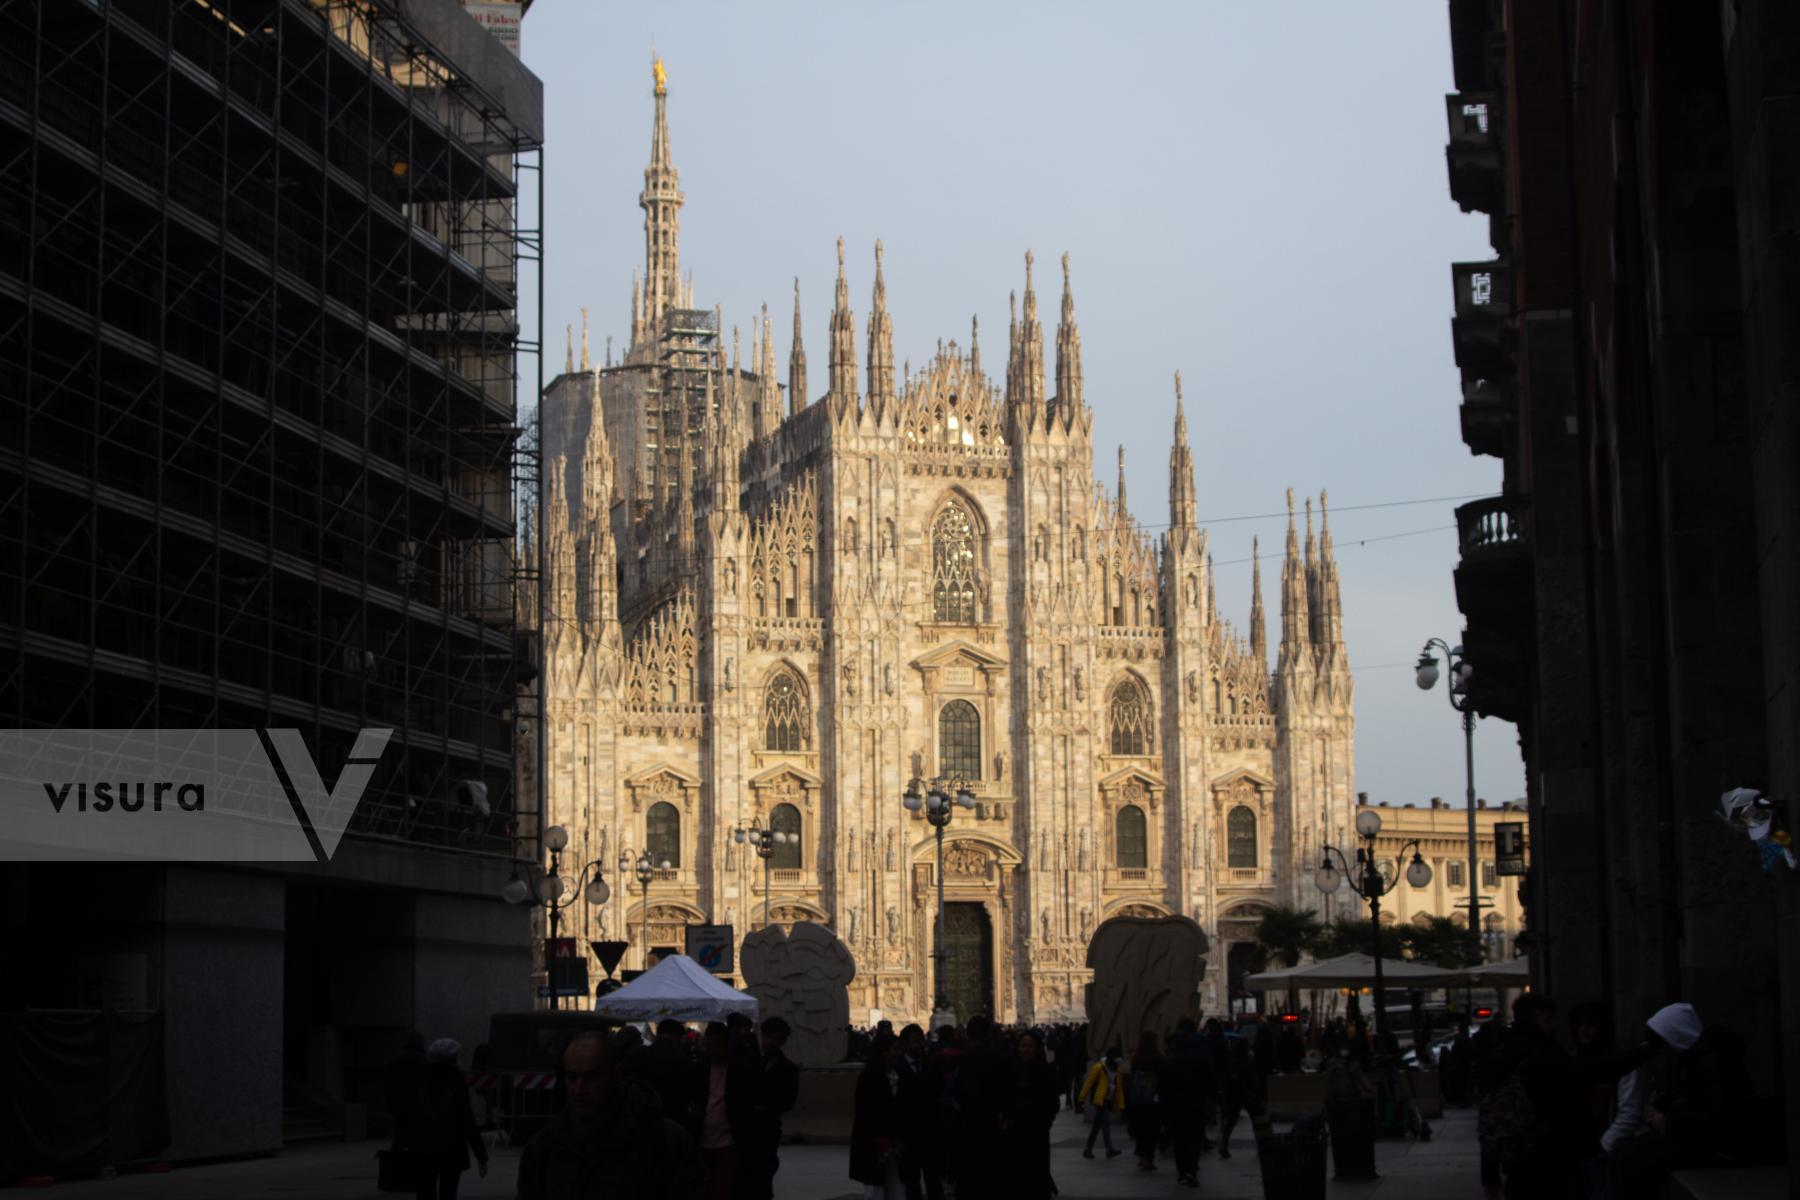 Purchase An Evening With Il Duomo by James Reade Venable